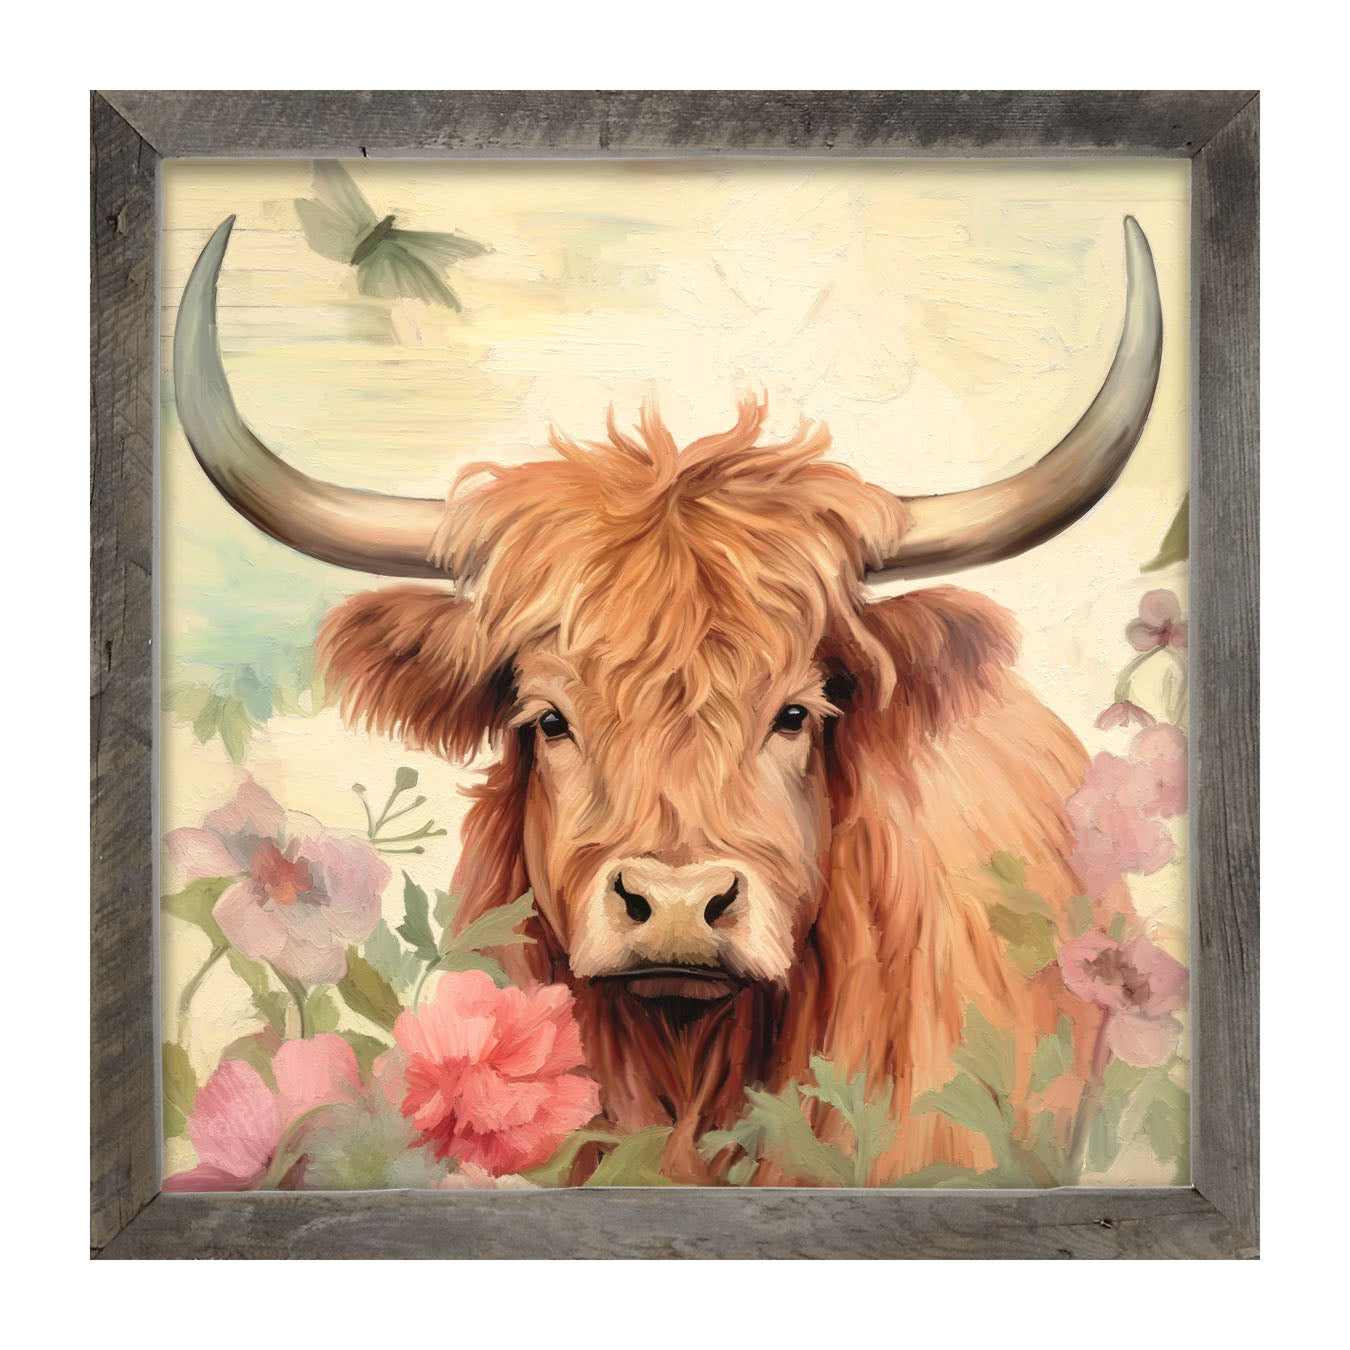 Brown Highland cow with flowers